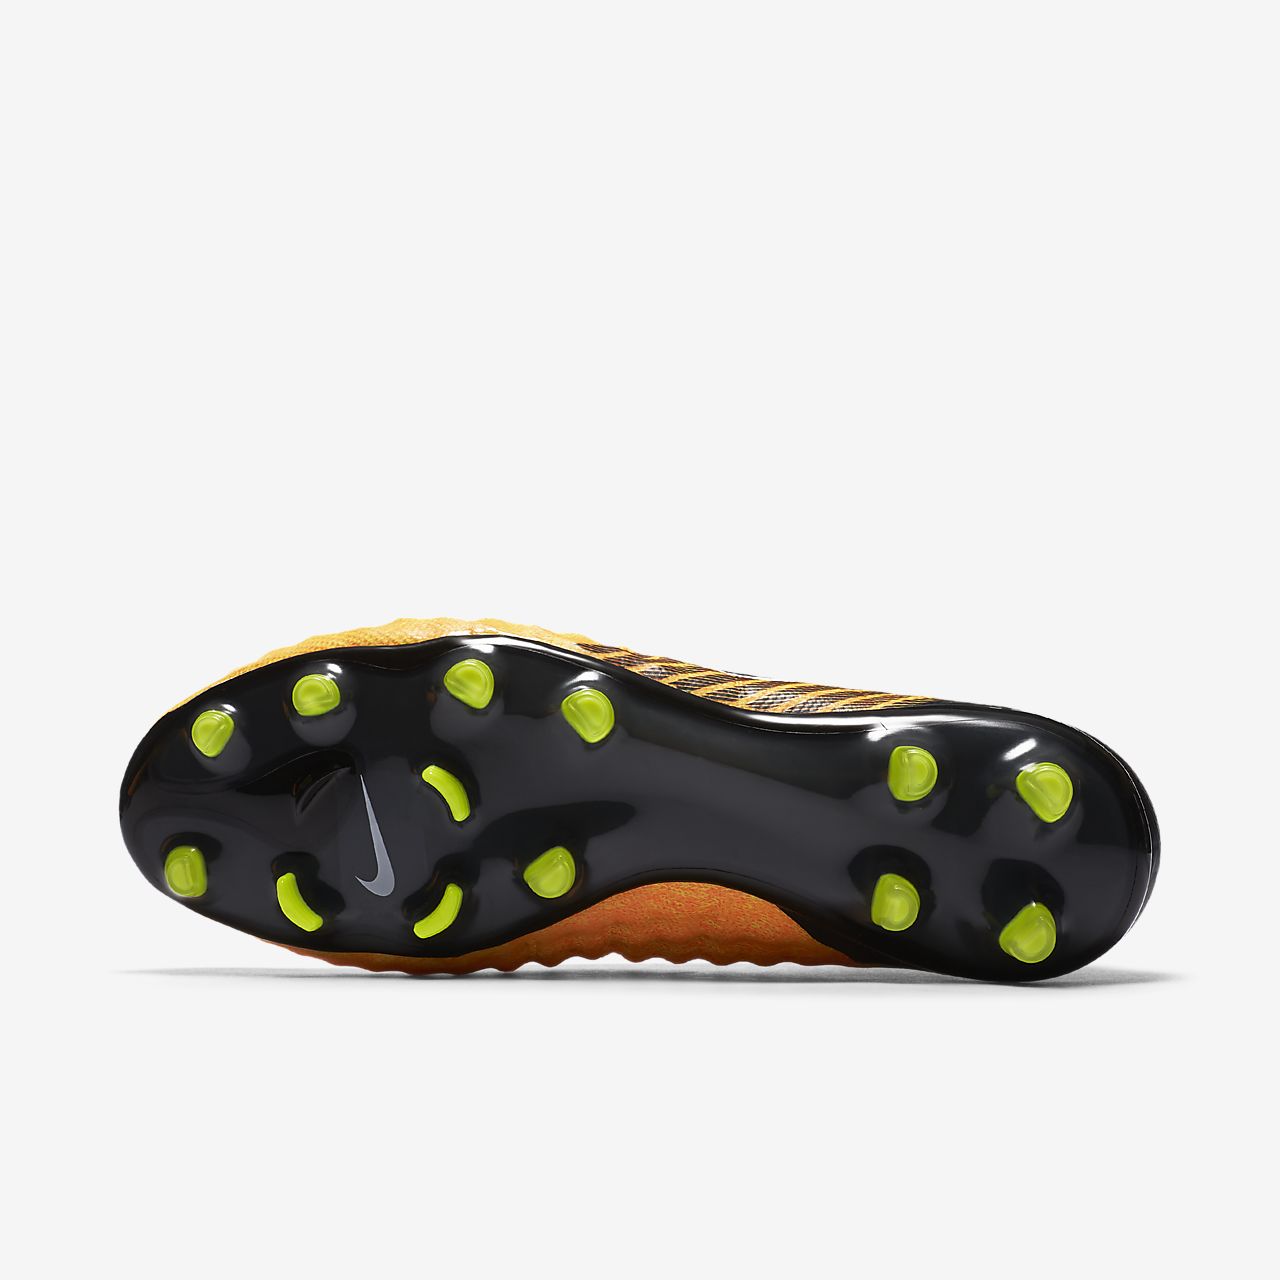 browse From Our Nike Magista Obra II AG PRO Men's Artificial